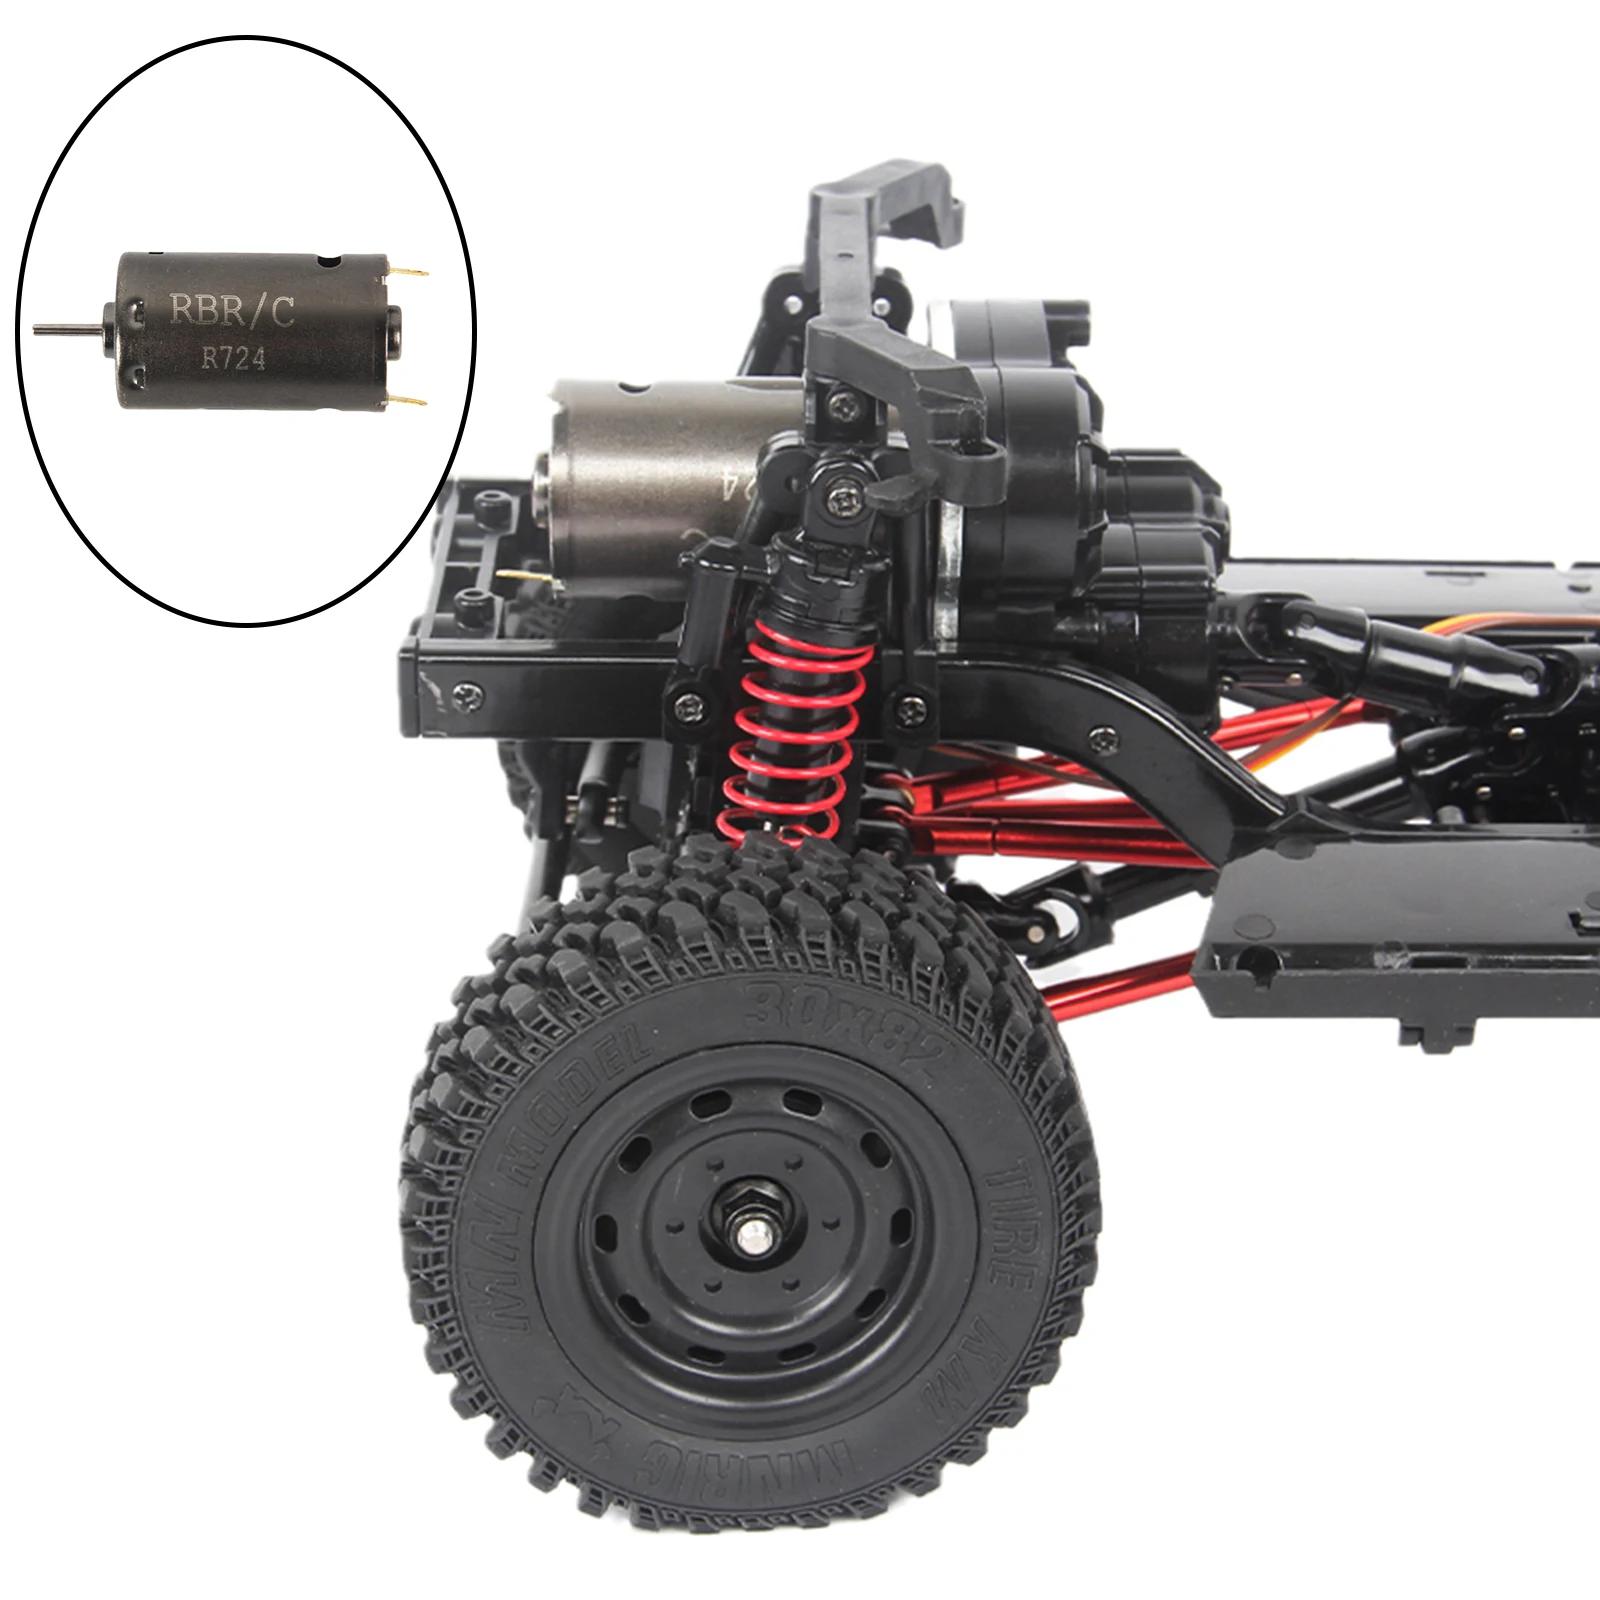 RC Metal High Speed 390 Motor for MN86 1/12 Scale Off-Road Vehicles Model Crawler Car Buggy Trucks DIY Accessory